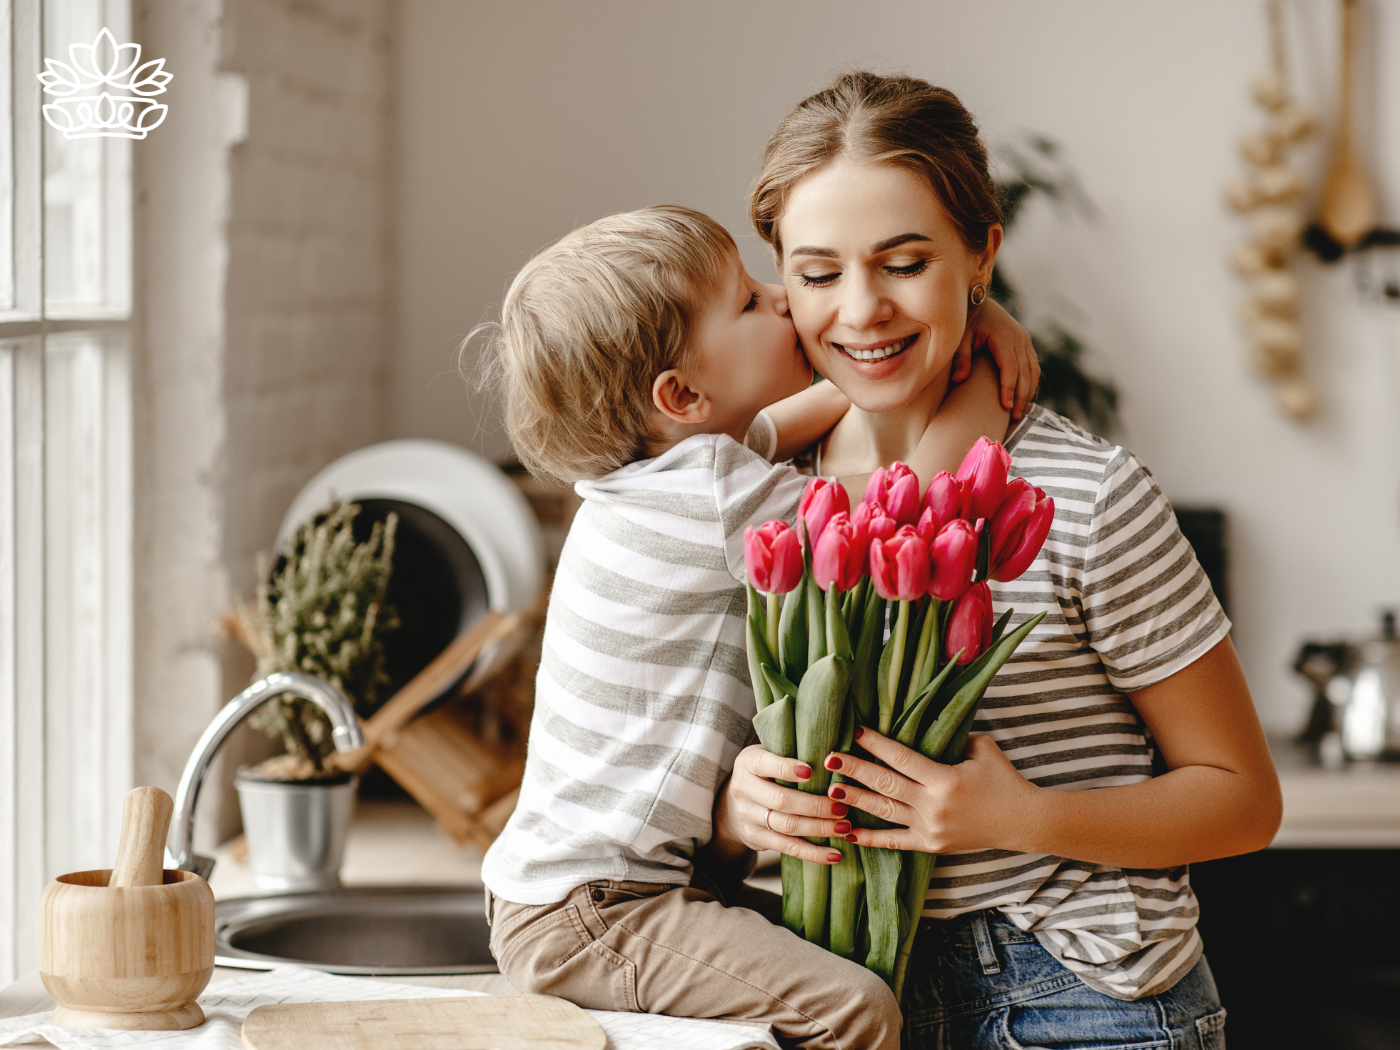 A child giving a bouquet of tulips to his smiling mother - Fabulous Flowers and Gifts, All Fabulous Flowers and Gift Boxes.